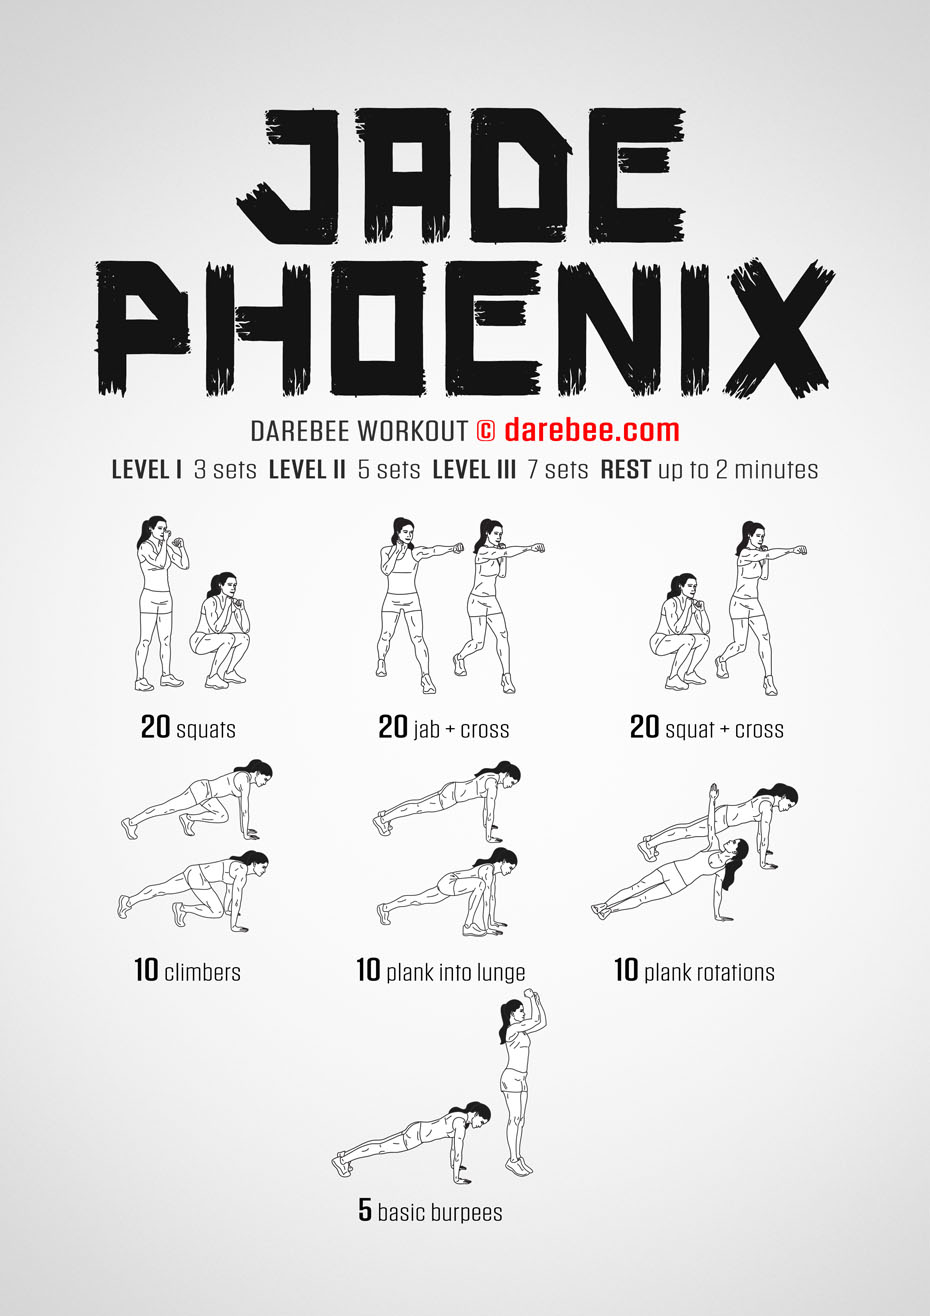 Jade Phoenix is a DAREBEE home fitness no-equipment workout that works your entire body and helps you build strength and endurance.